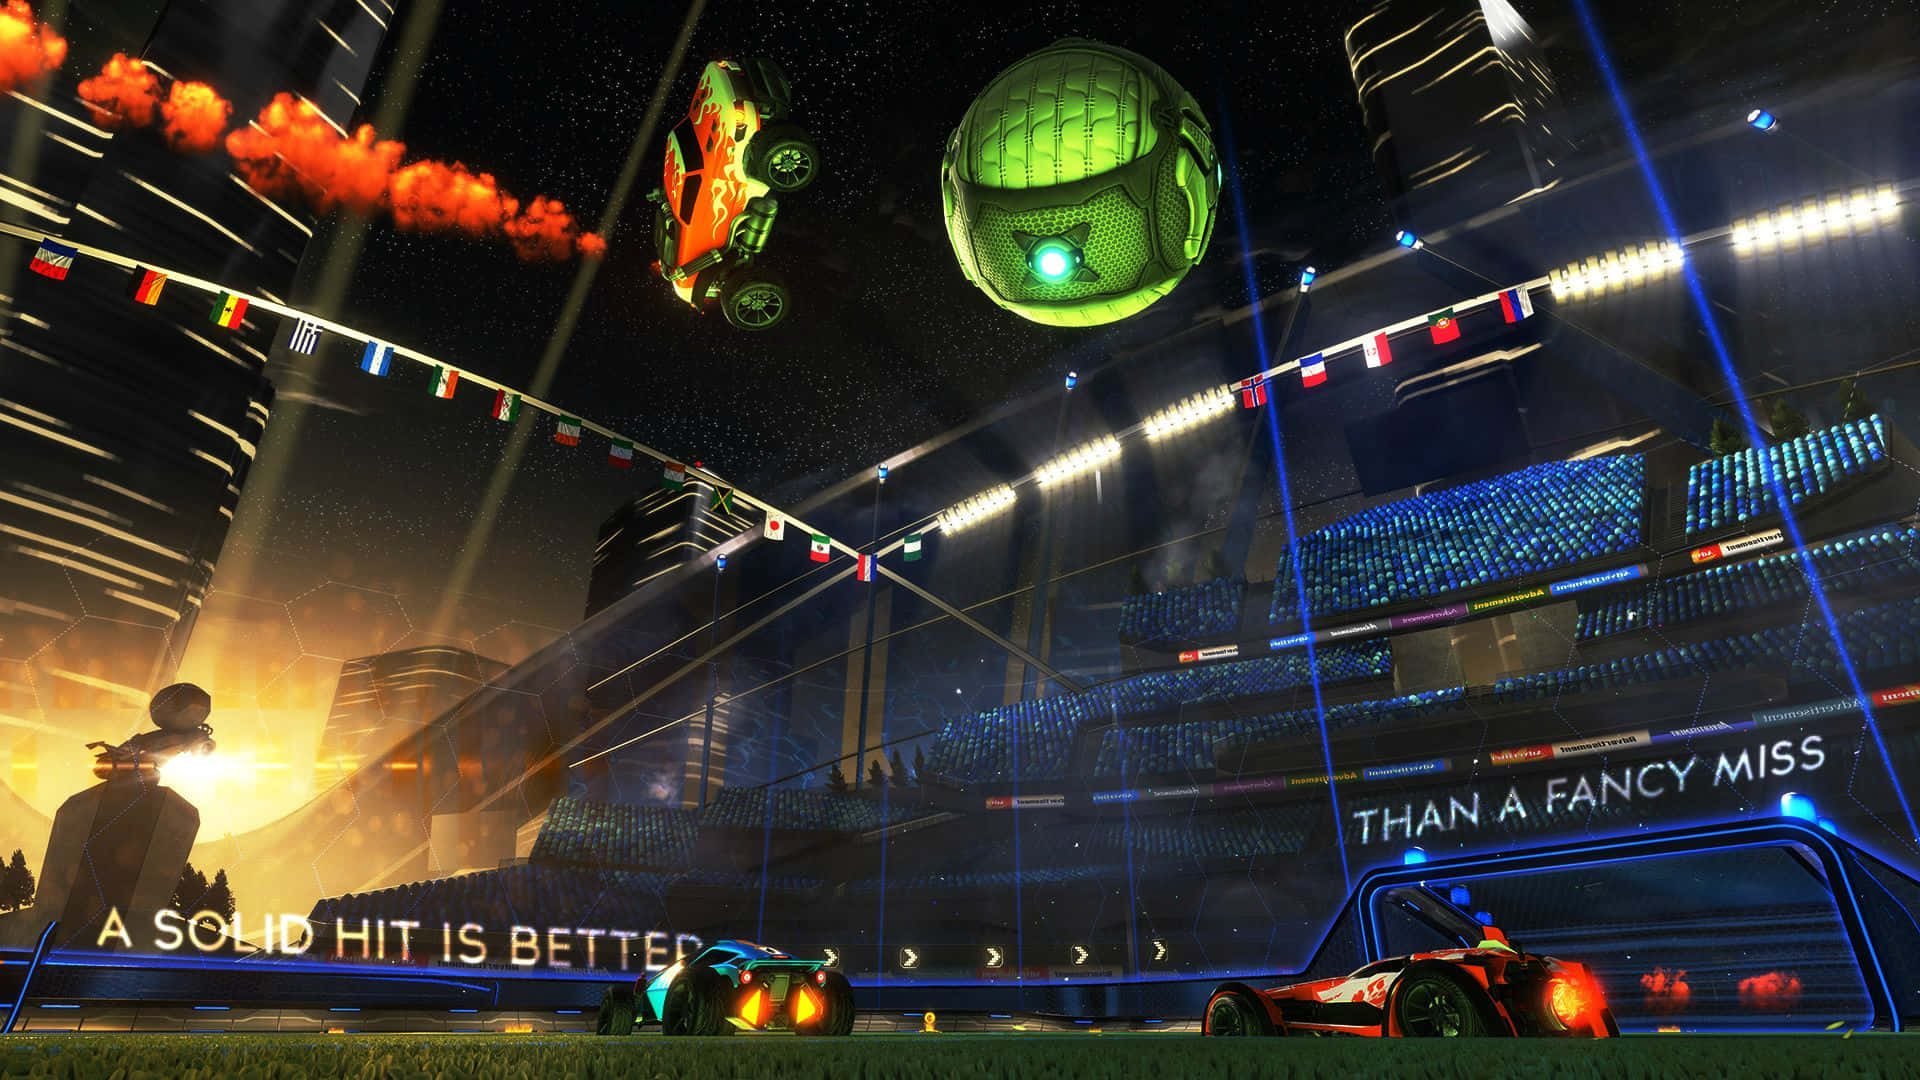 'Going for the goal and victory in Rocket League.'